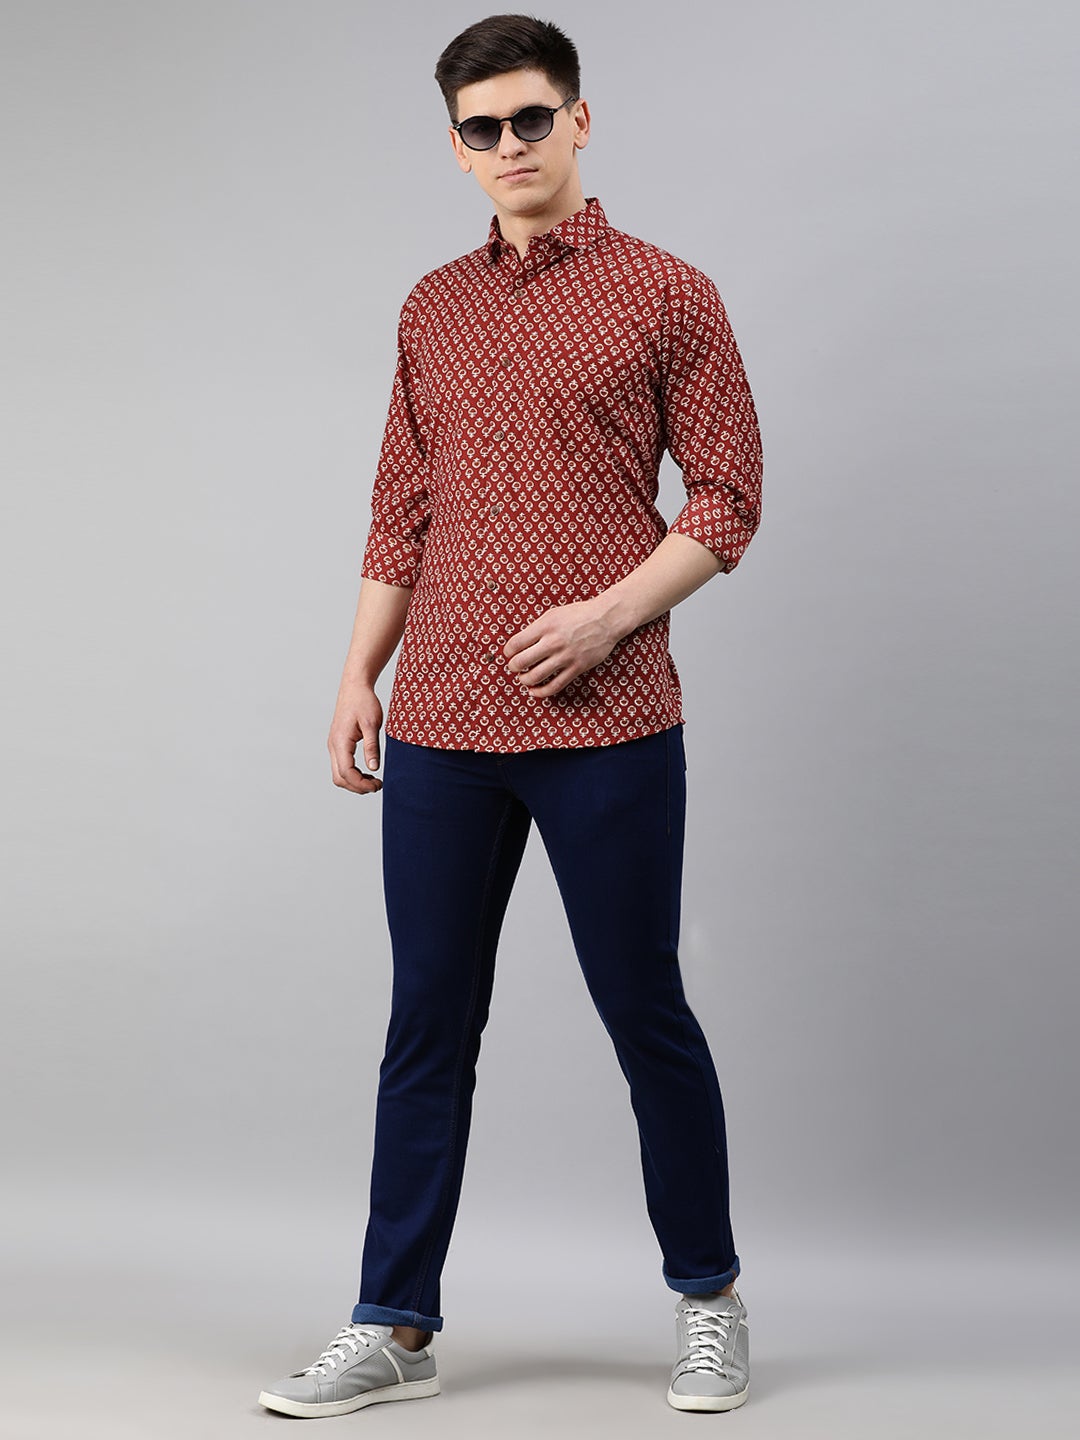 Maroon Cotton Full Sleeves Shirts For Men-MMF0223 - NOZ2TOZ